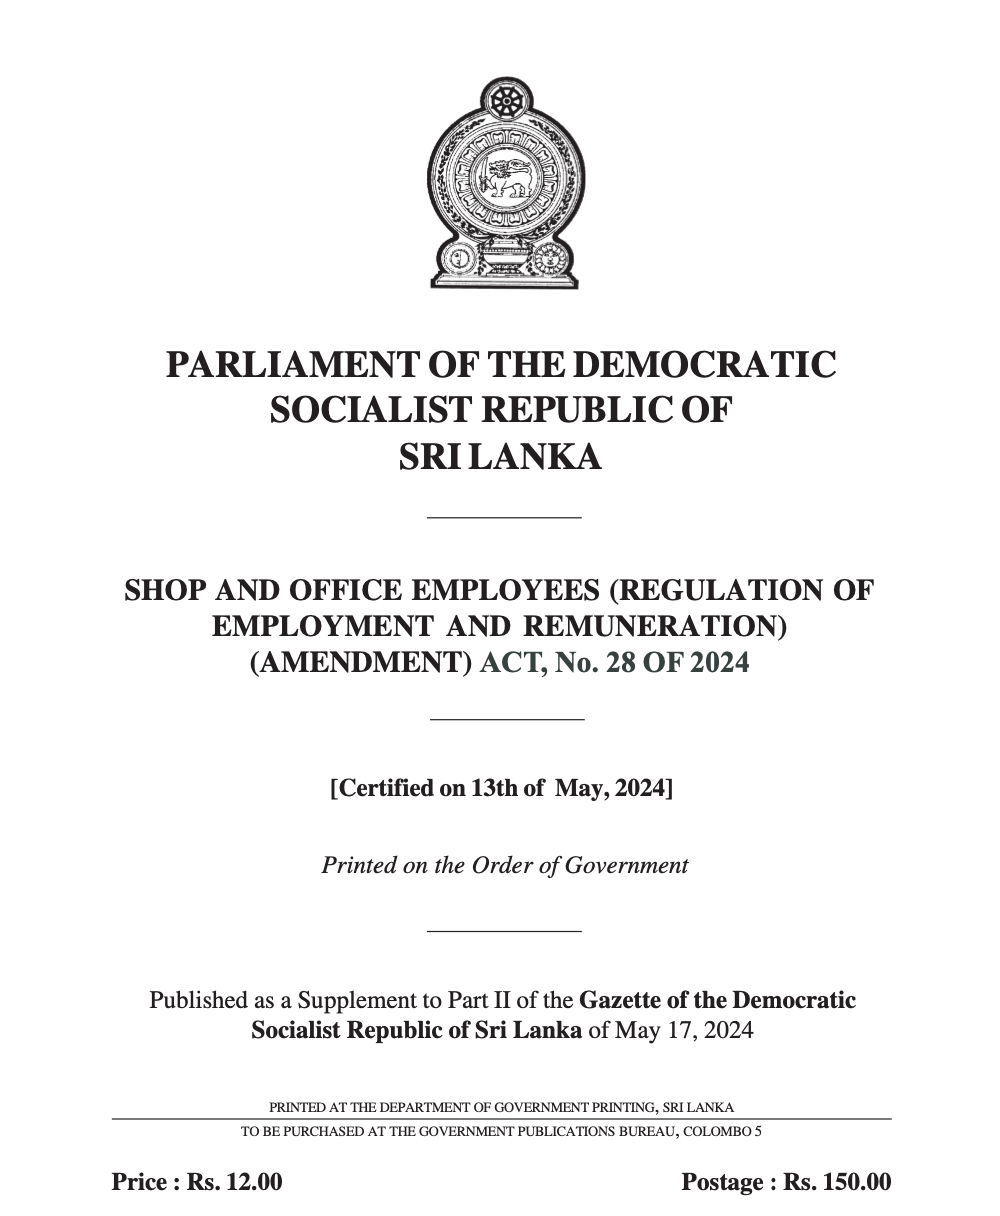 The Latest Amendments to the Shop and Office Employees Act